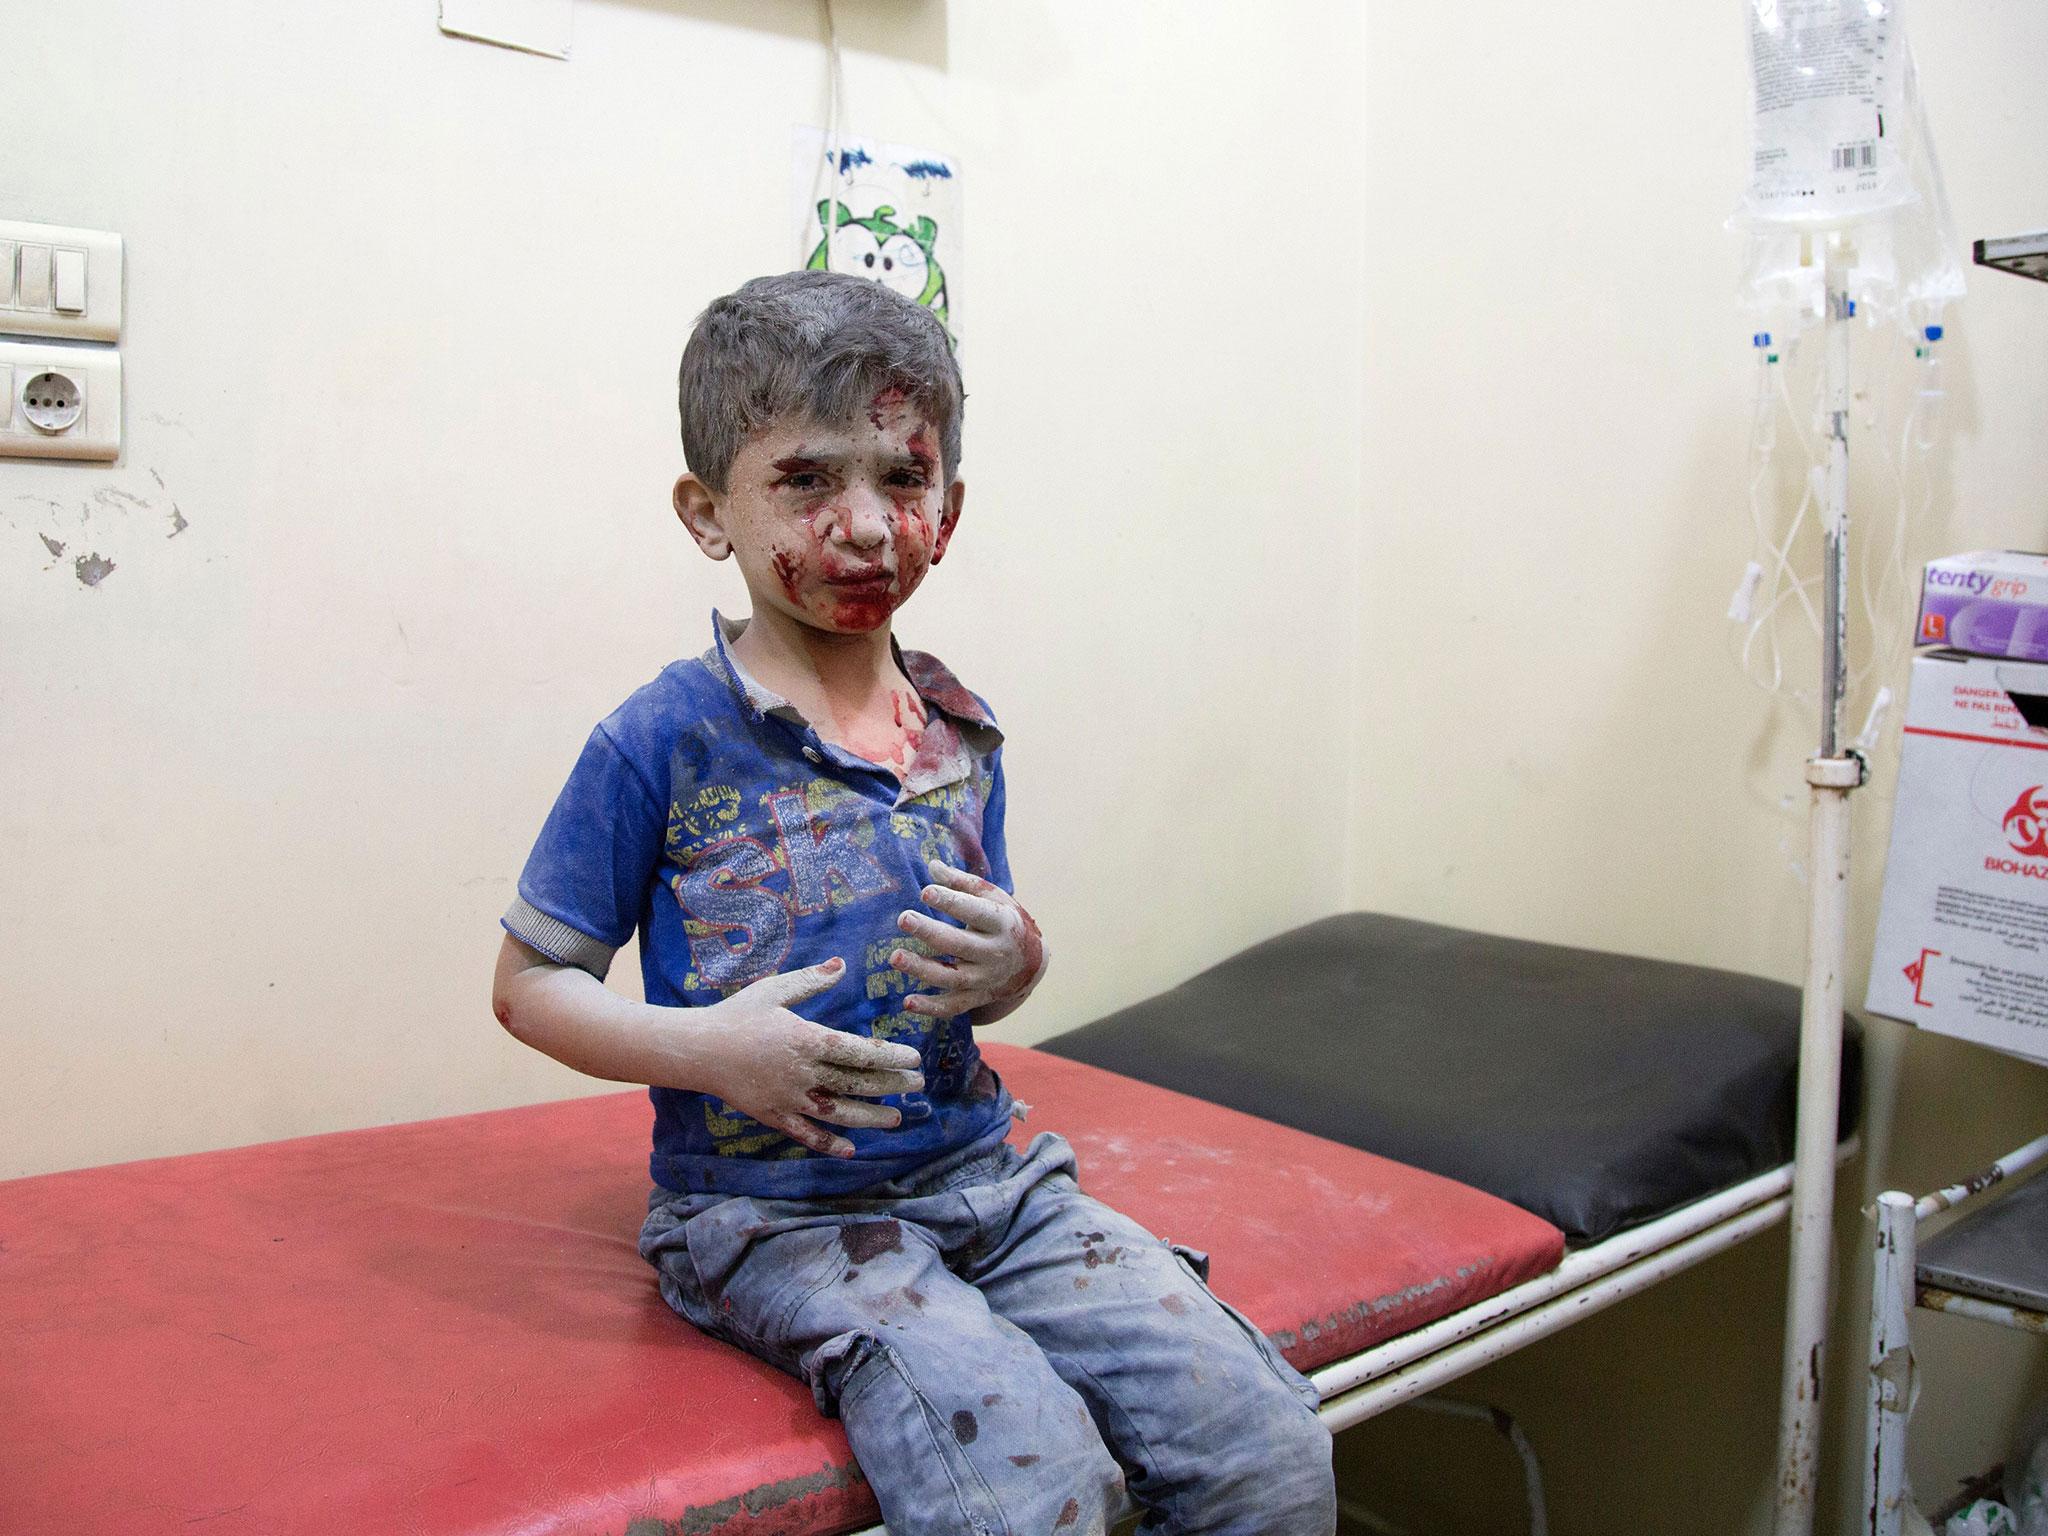 A Syrian boy awaits treatment at a make-shift hospital following air strikes on rebel-held eastern areas of Aleppo on 24 September, 2016